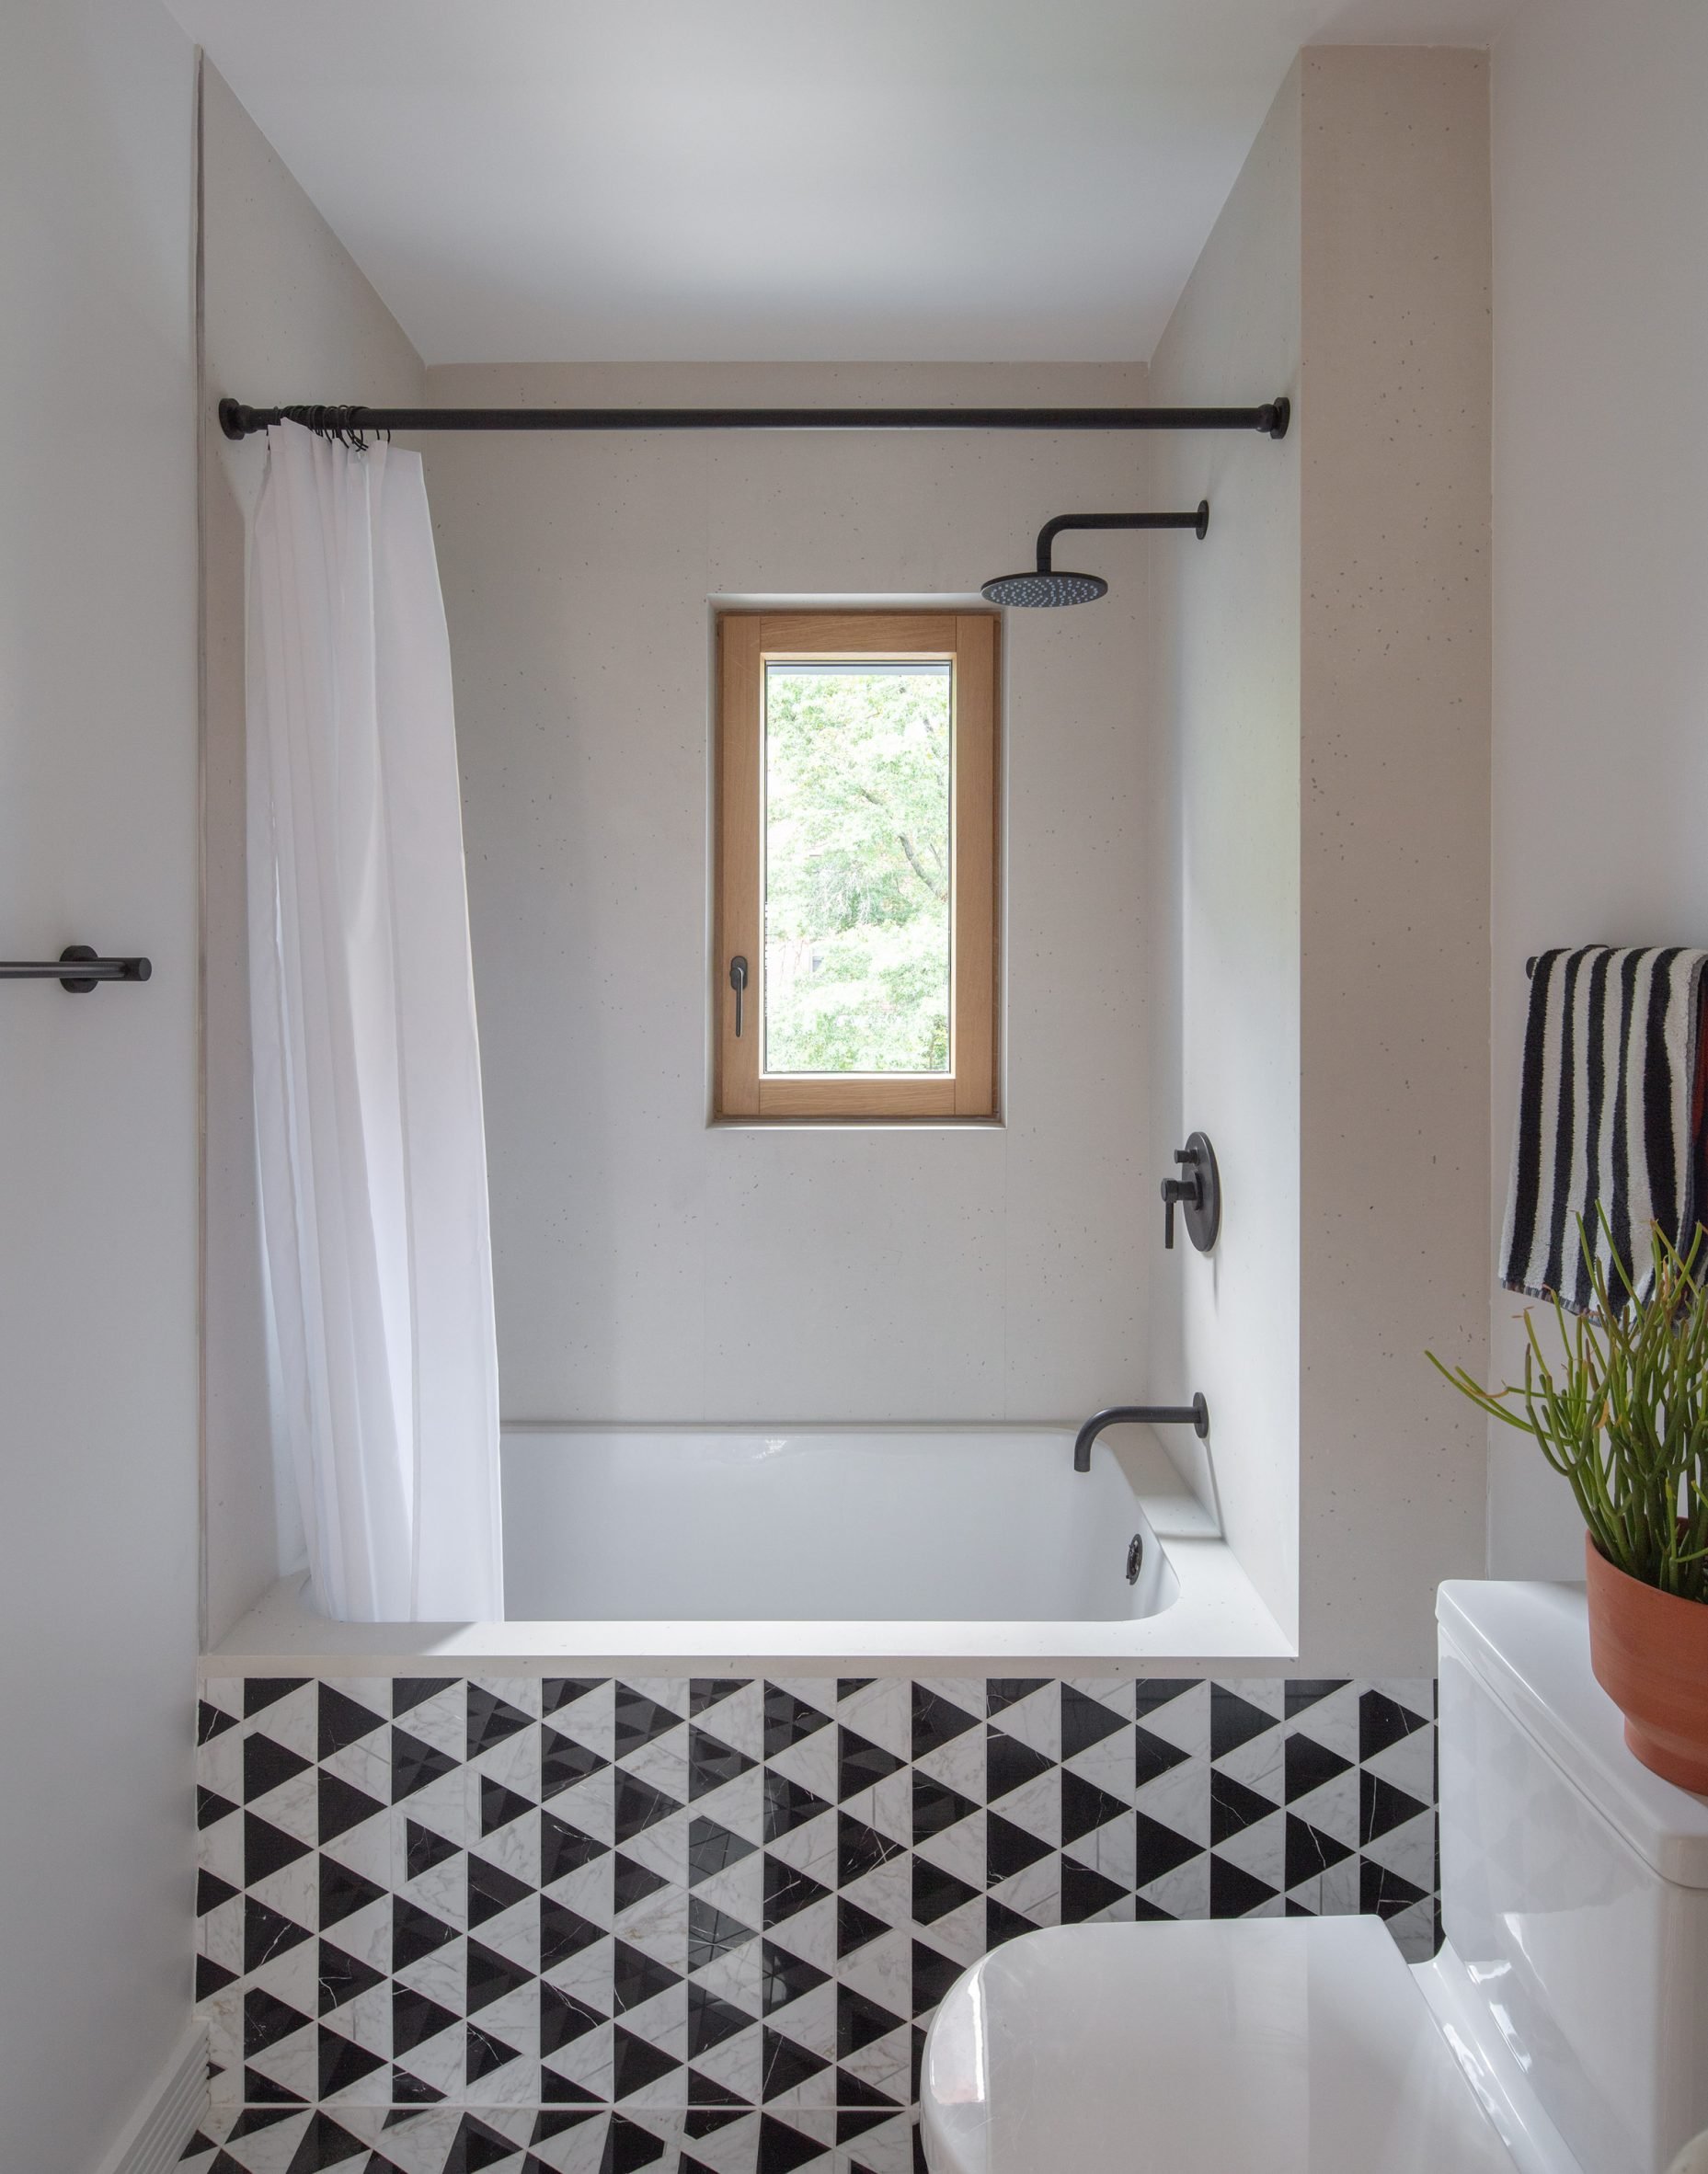 Bathroom with black and white tiles and fixtures